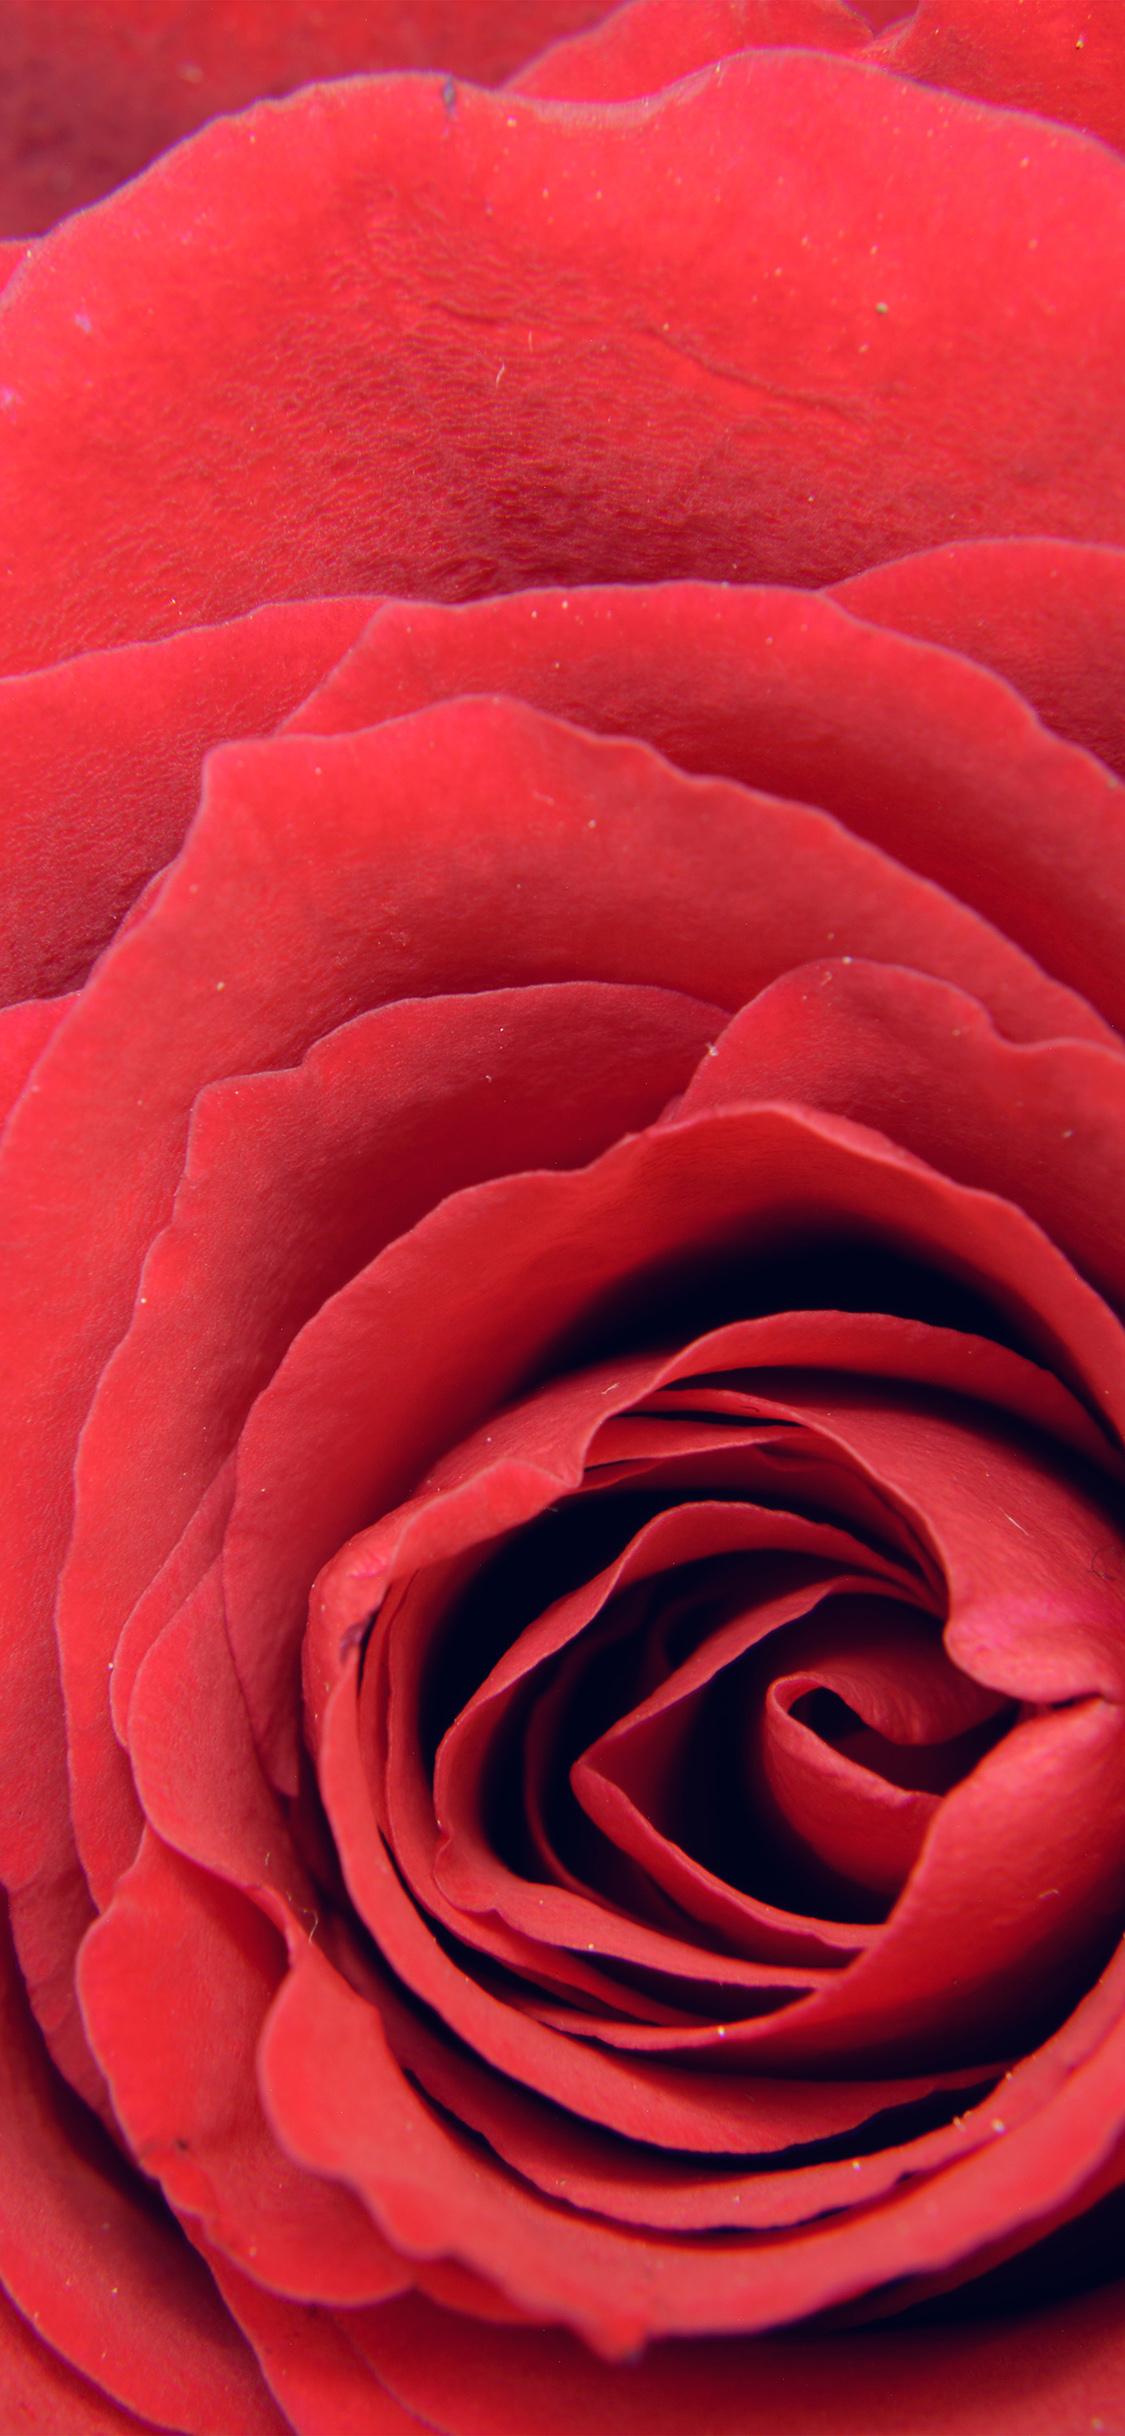 iPhone X wallpaper. rose red flower